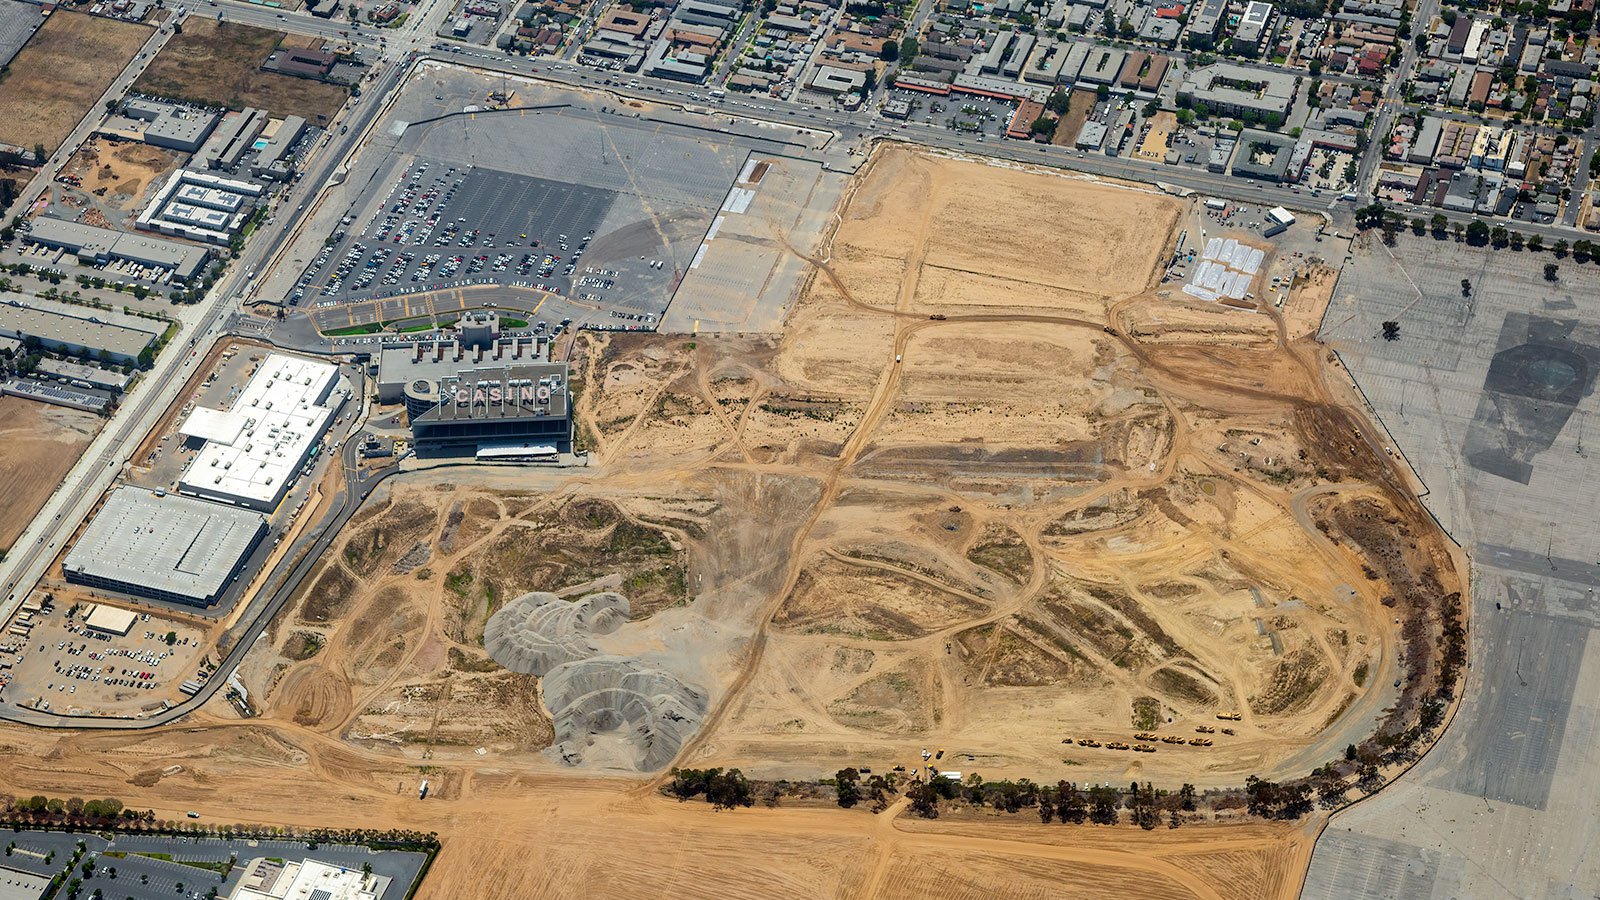 Blog photo of the Hollywood Park site after the removal of the race track in June 2016